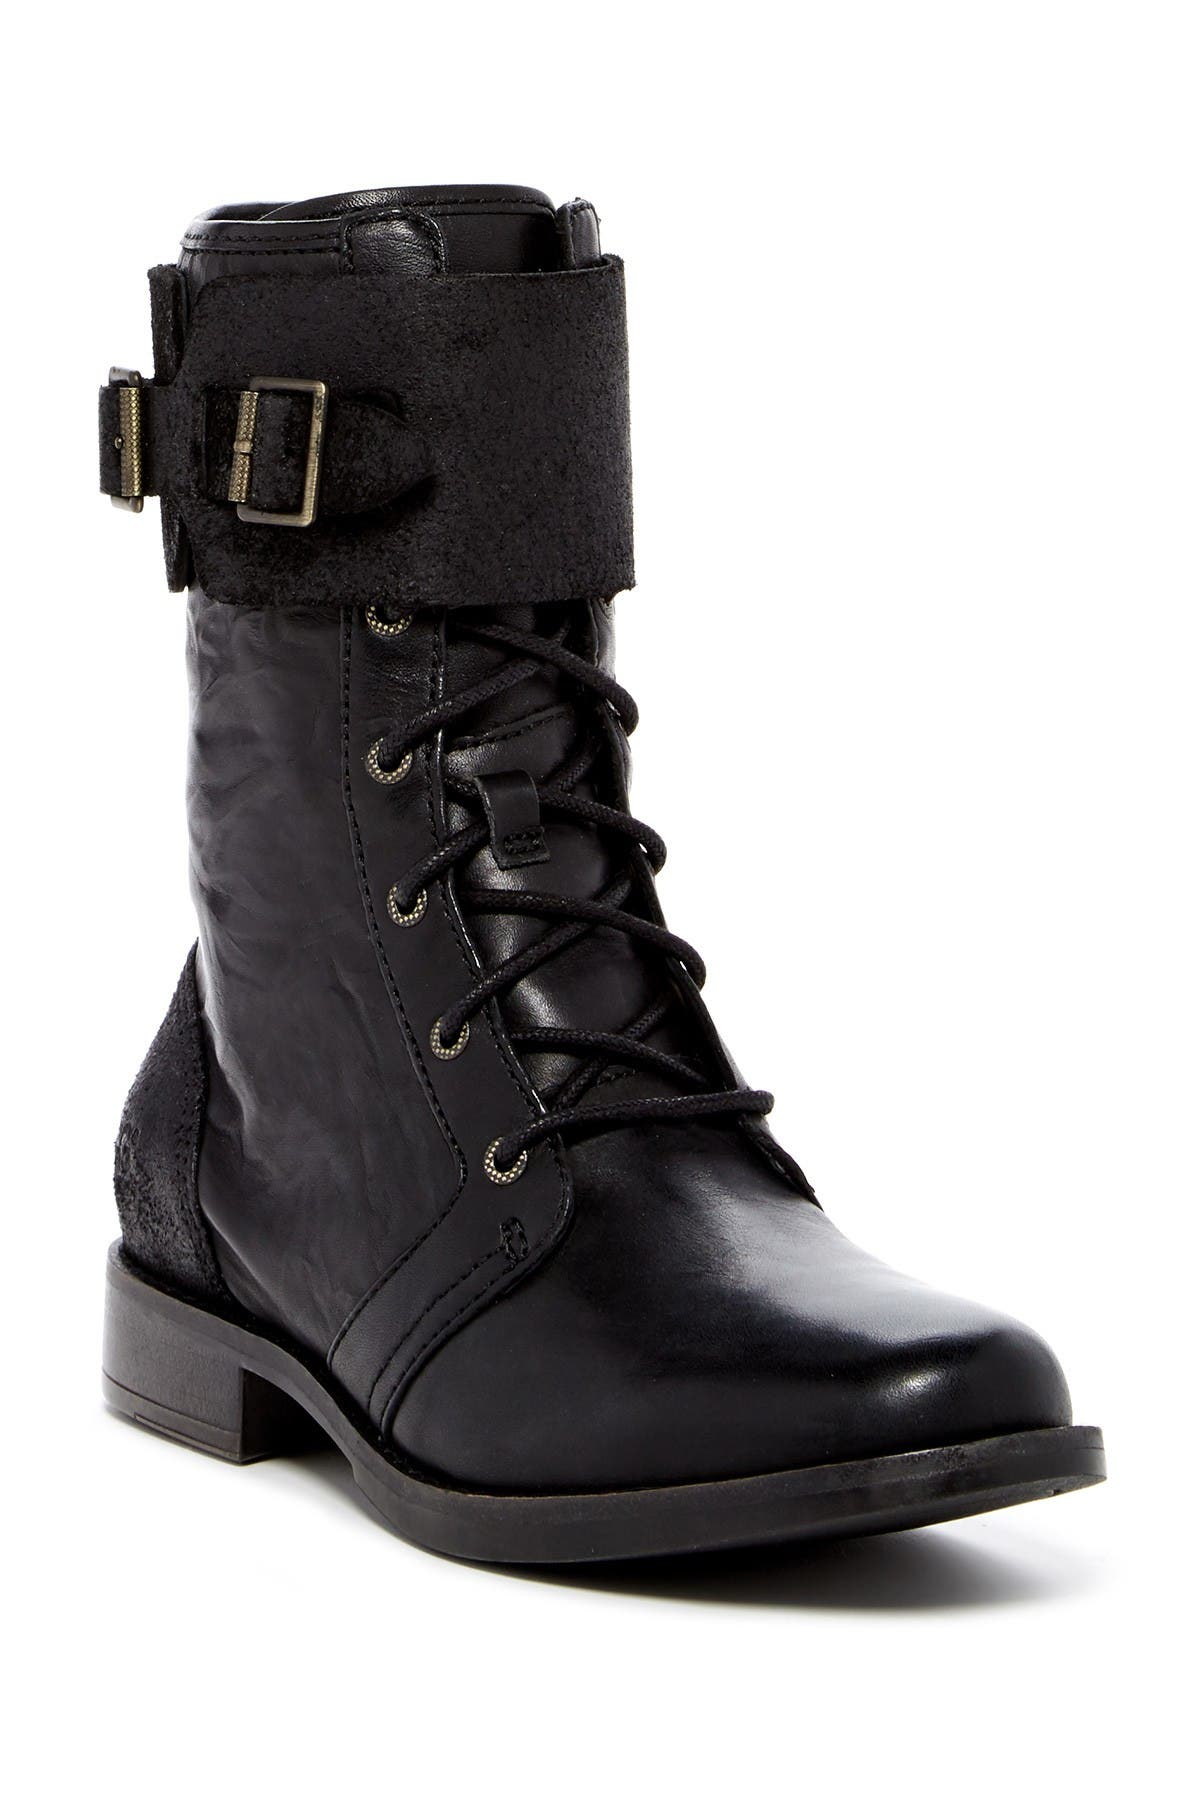 shearling lined combat boots